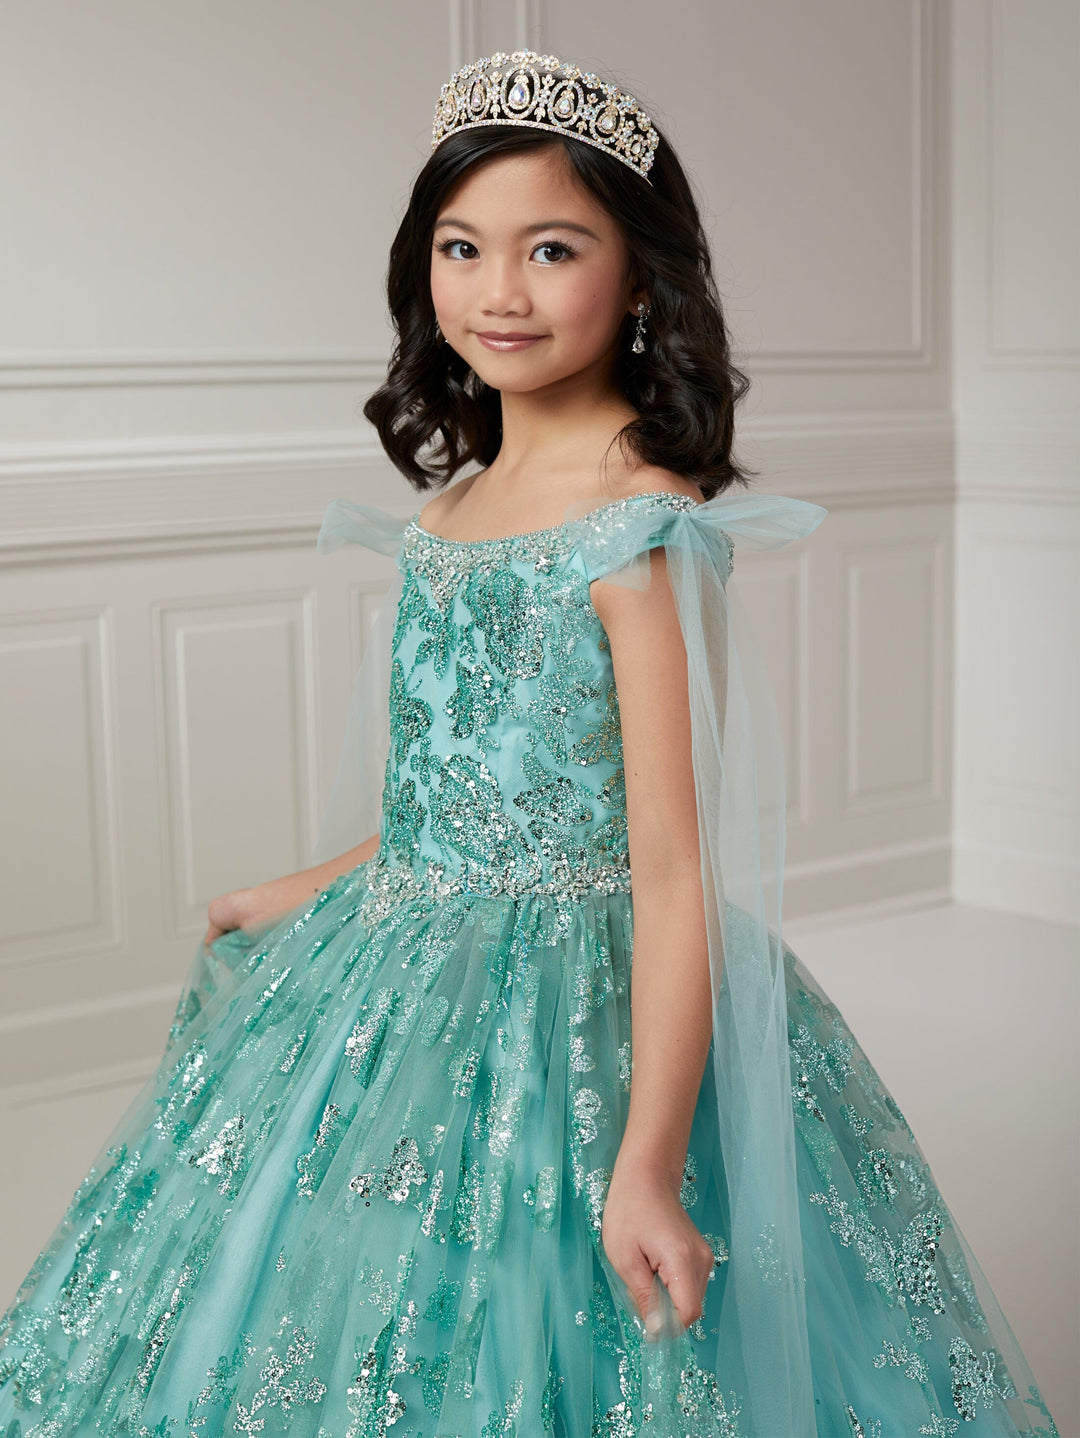 Girls Butterfly Glitter Print Gown by Tiffany Princess 13717